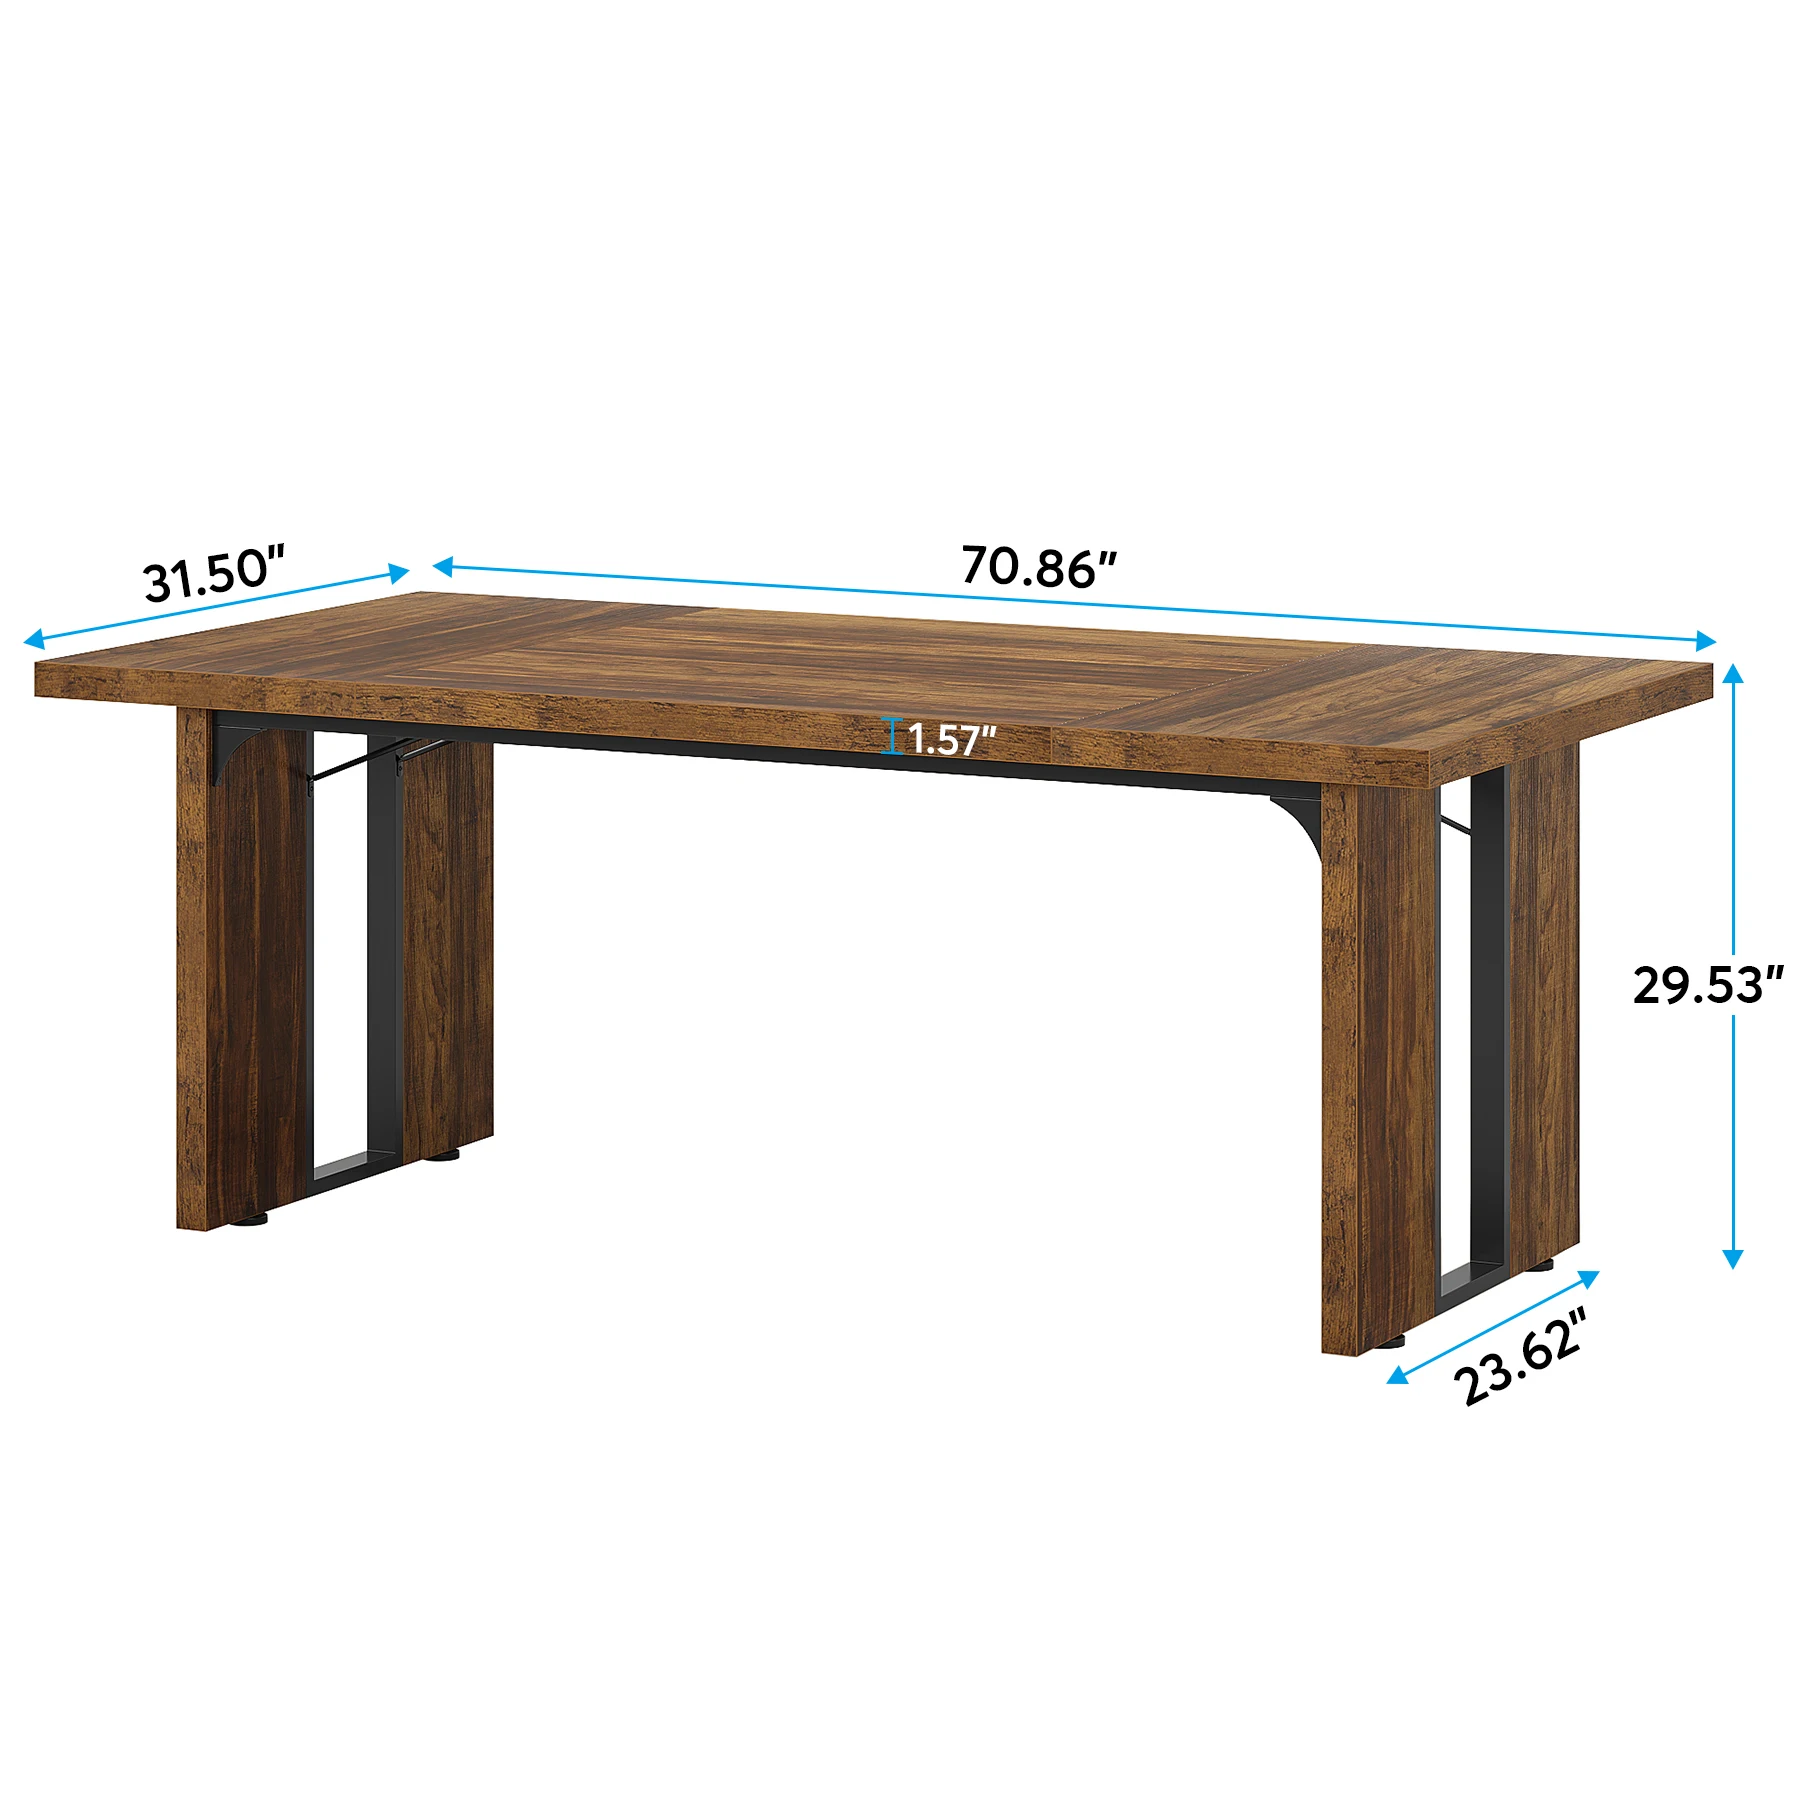 Tribesigns Mdf Furniture Contemporary Executive Office Desk Conference Table Home Office Furniture Design